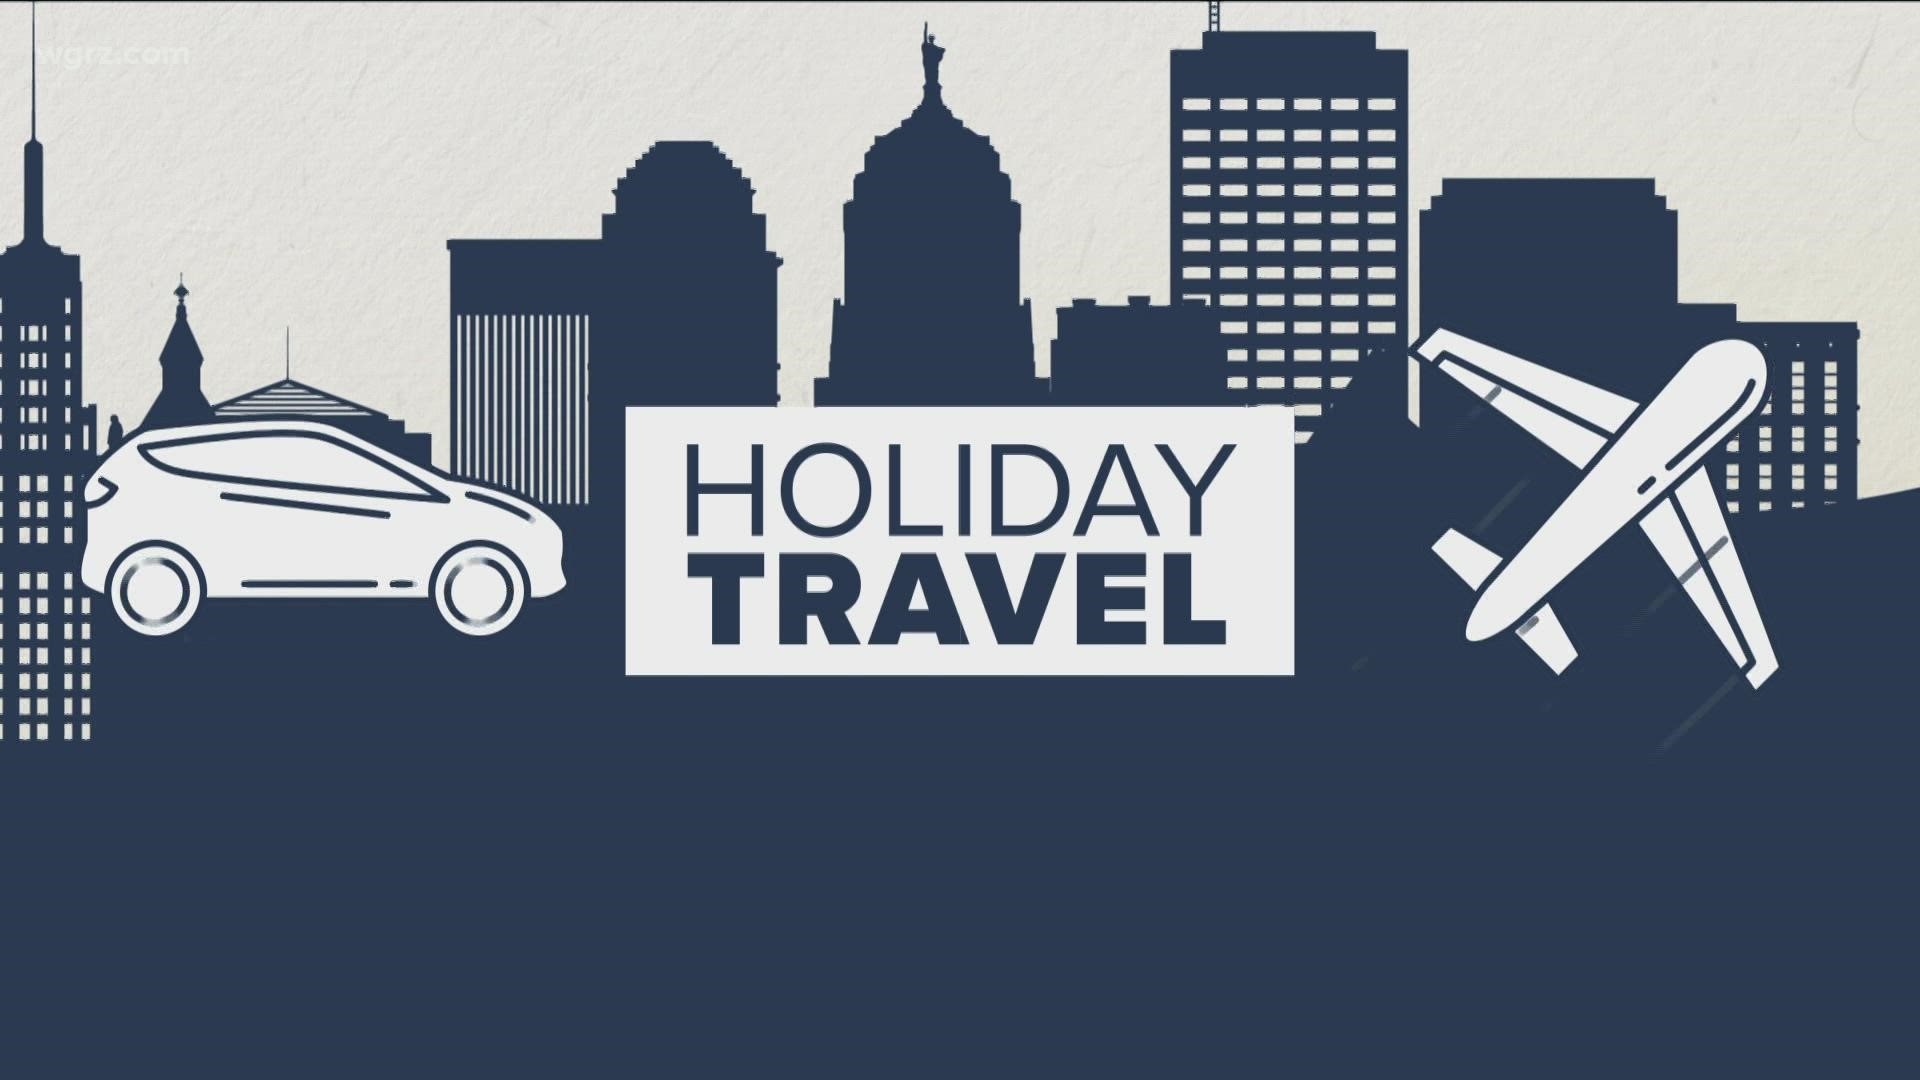 Town Hall: How to prepare for holiday travel this Thanksgiving